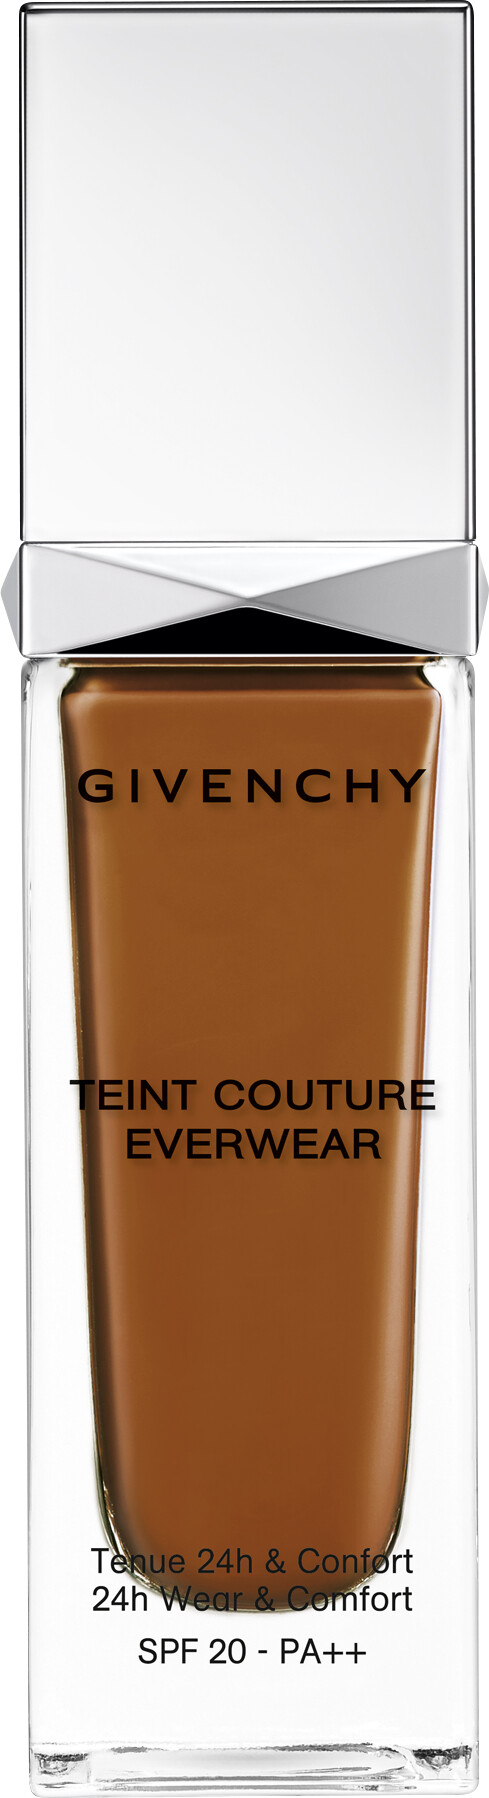 GIVENCHY Teint Couture Everwear 24h Wear & Comfort Foundation SPF20 30ml Y400